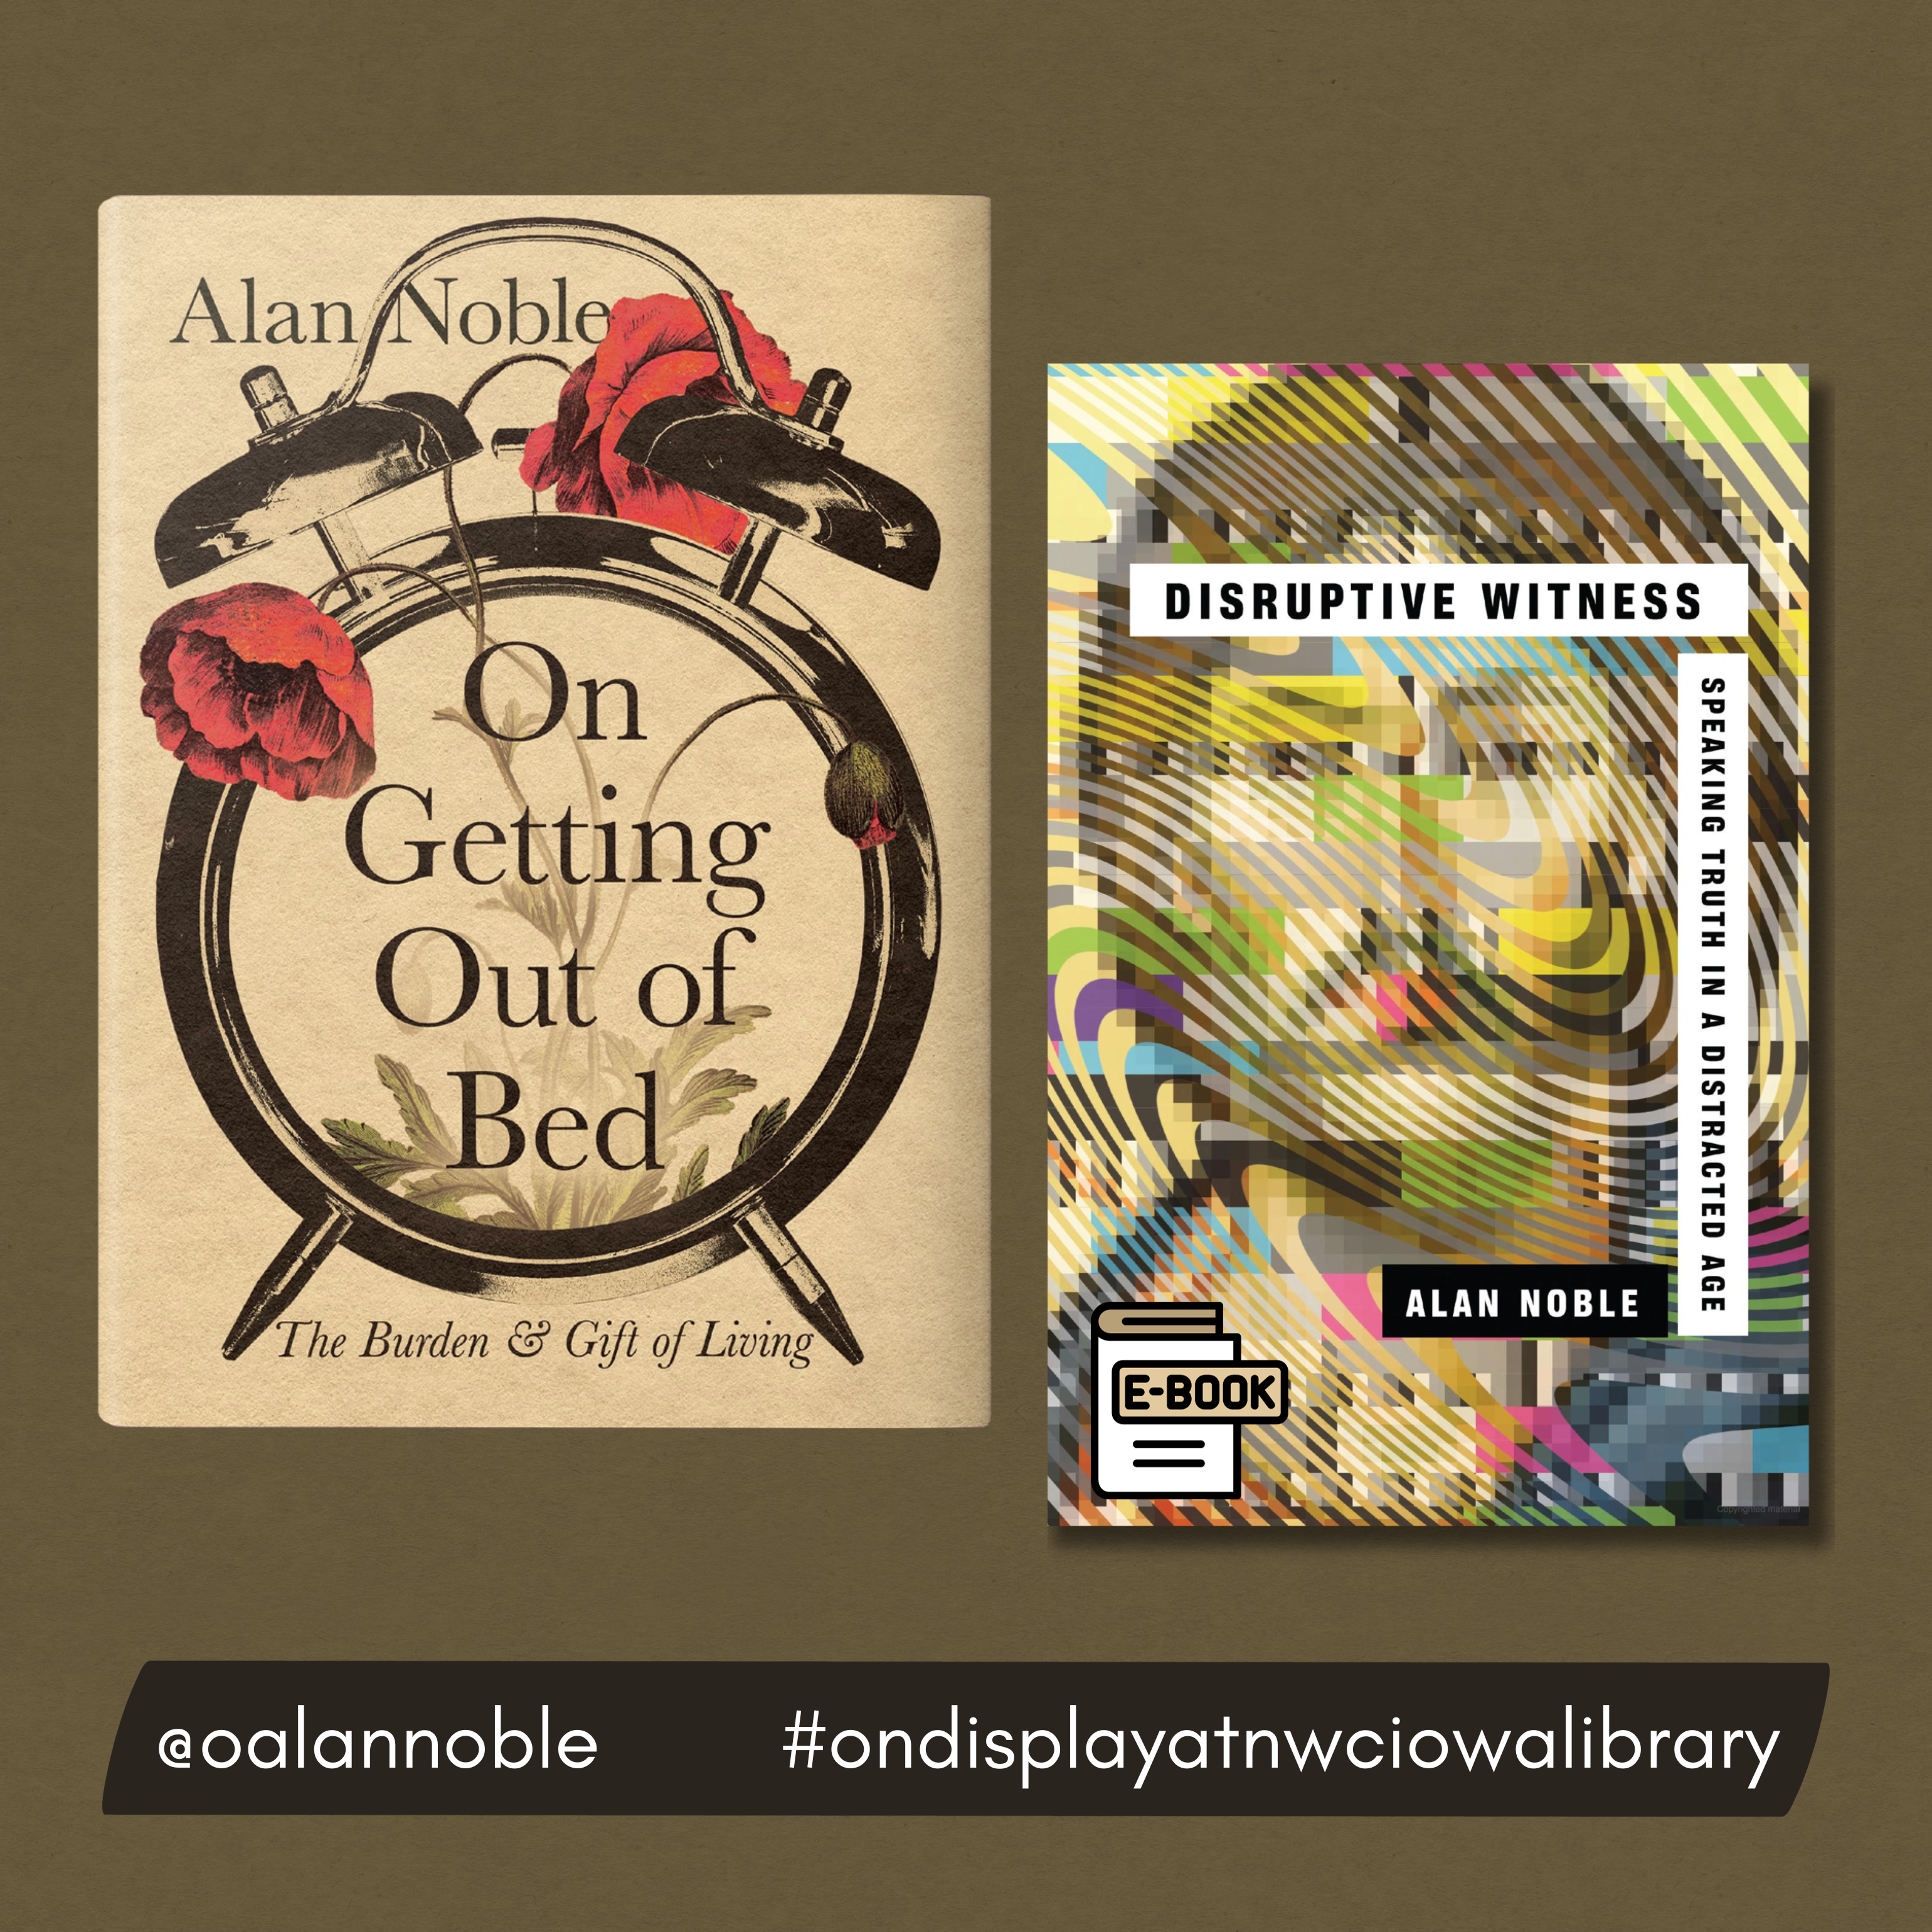 Now on Display: On Getting Out of Bed: The Burden & Gift of Living by Dr. Alan Noble. Stop by the Library Desk to view and borrow this book. Our library also provides access to his eBook Disruptive Witness: Speaking Truth in a Distracted Age. 